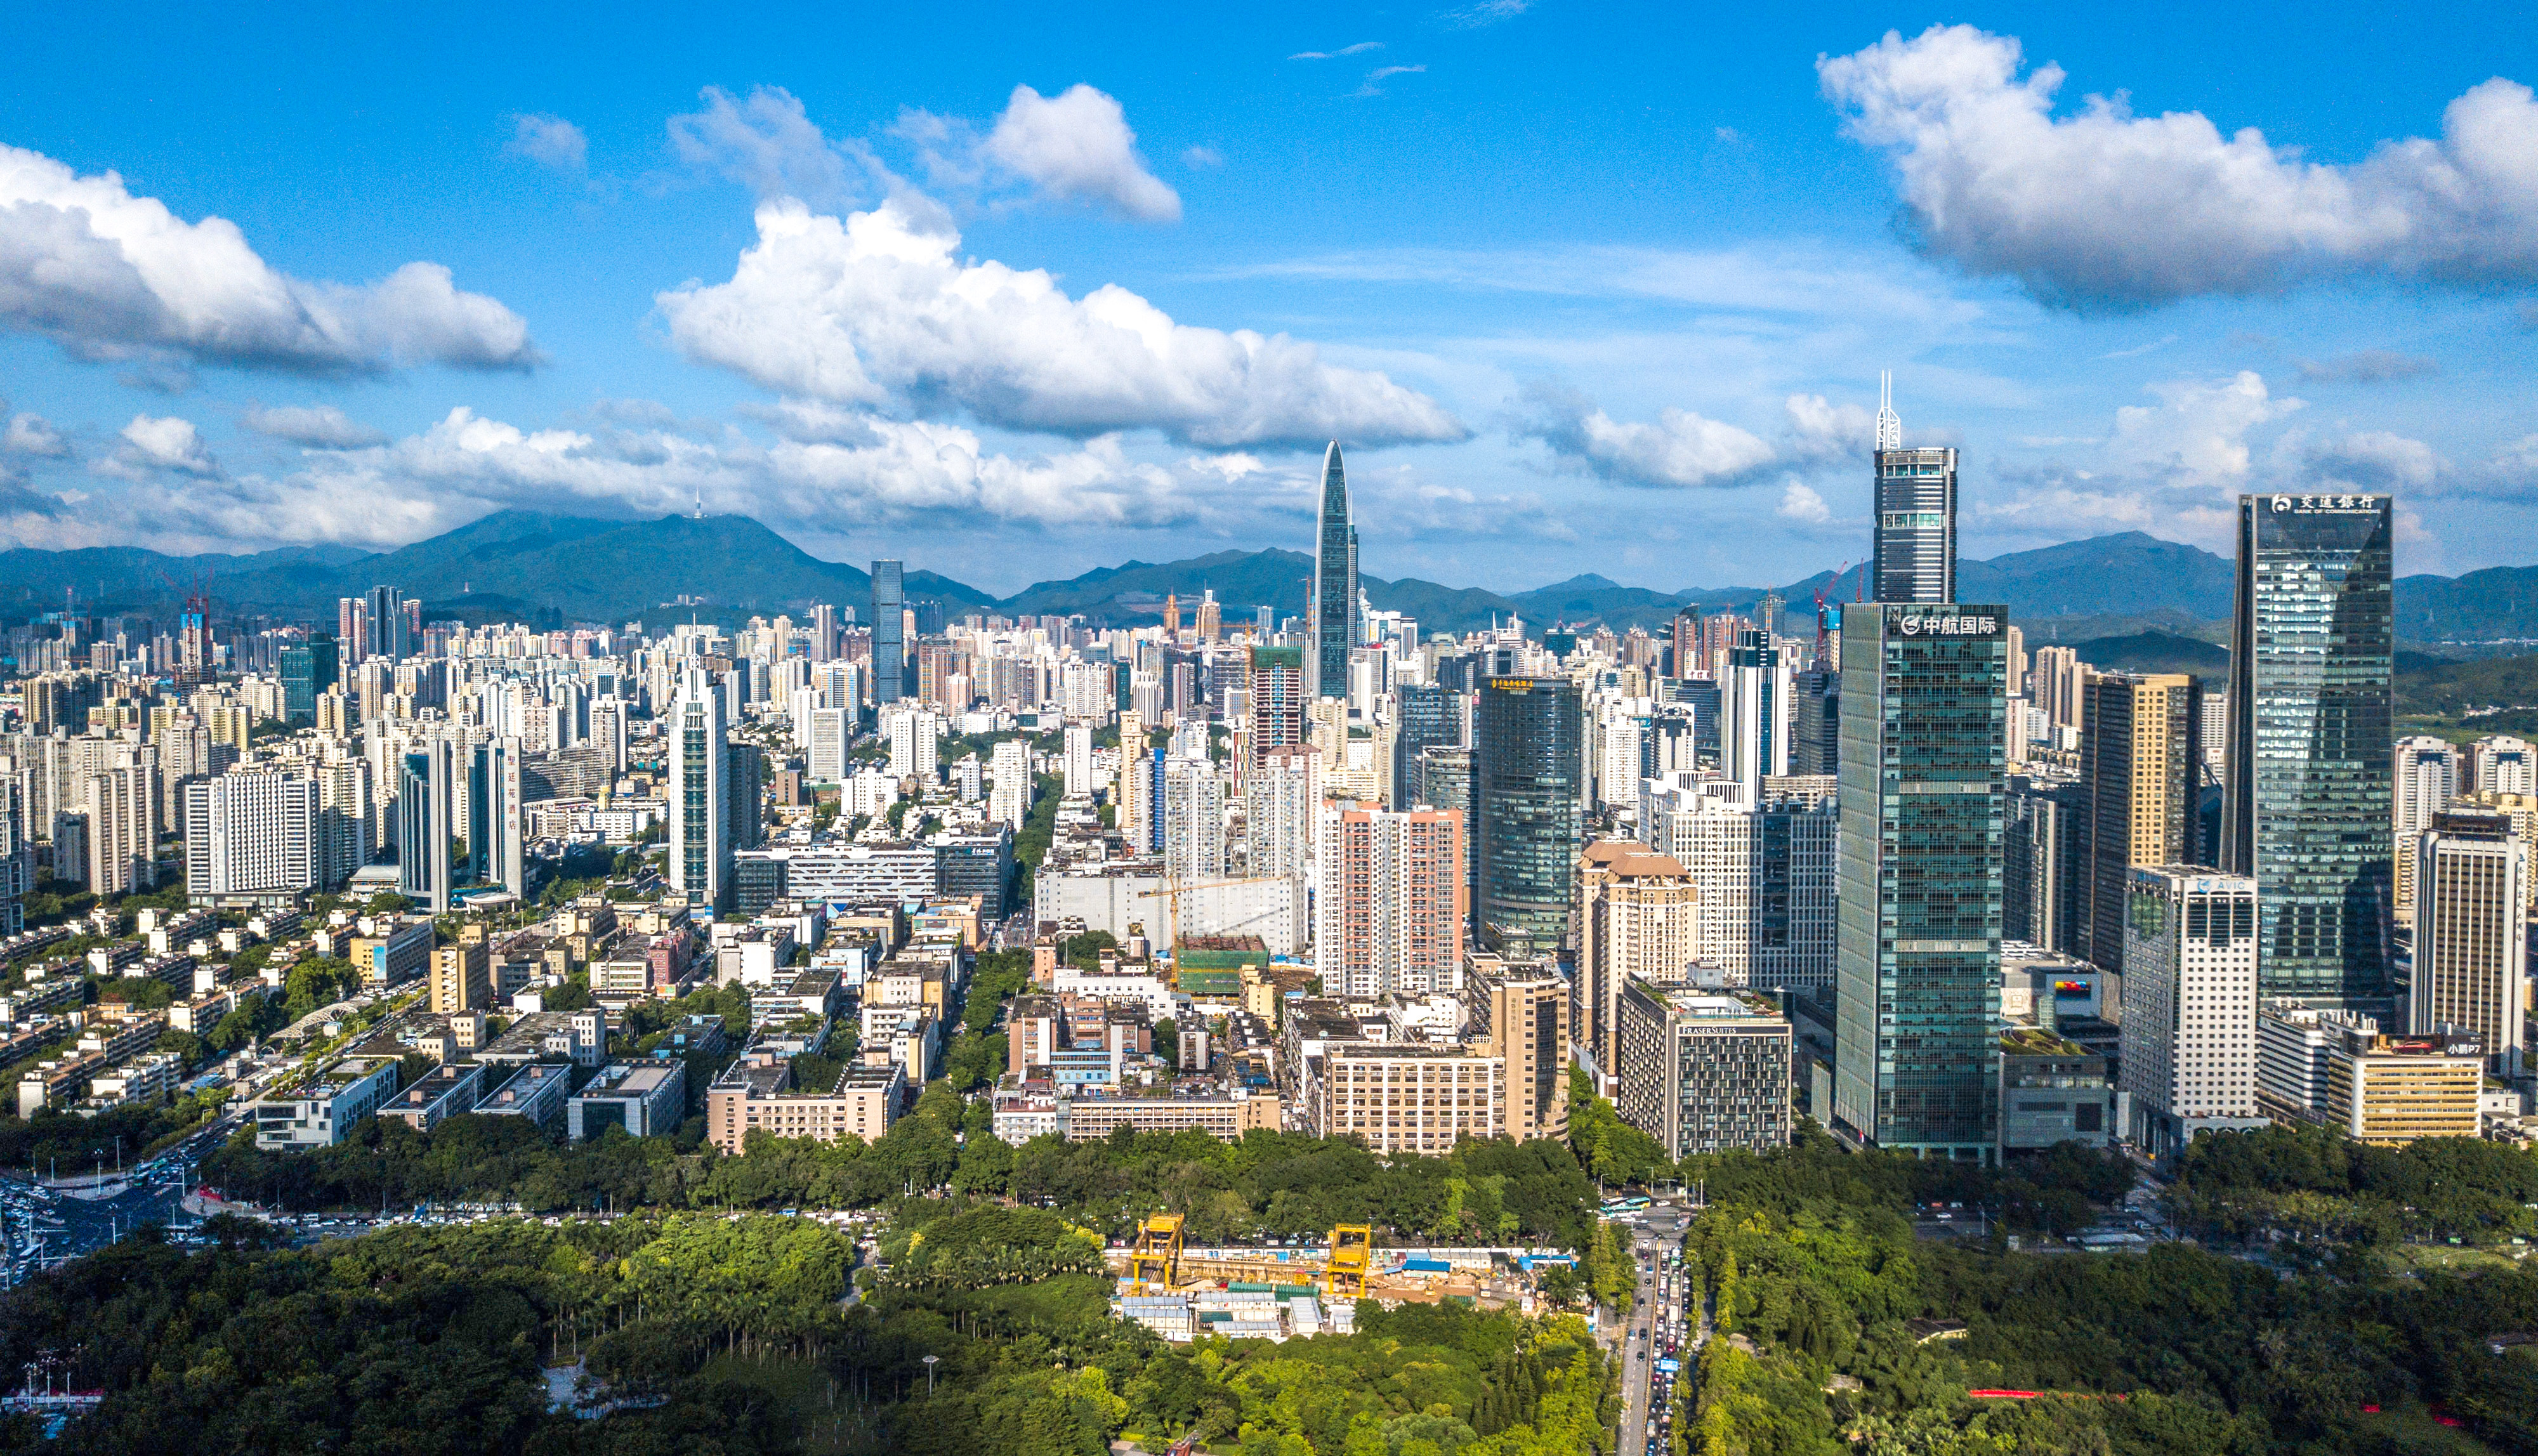 The Hong Kong Monetary Authority, along with partners, have launched a new initiative to nurture fintech talent in the Greater Bay Area, which includes Shenzhen. Photo: Xinhua